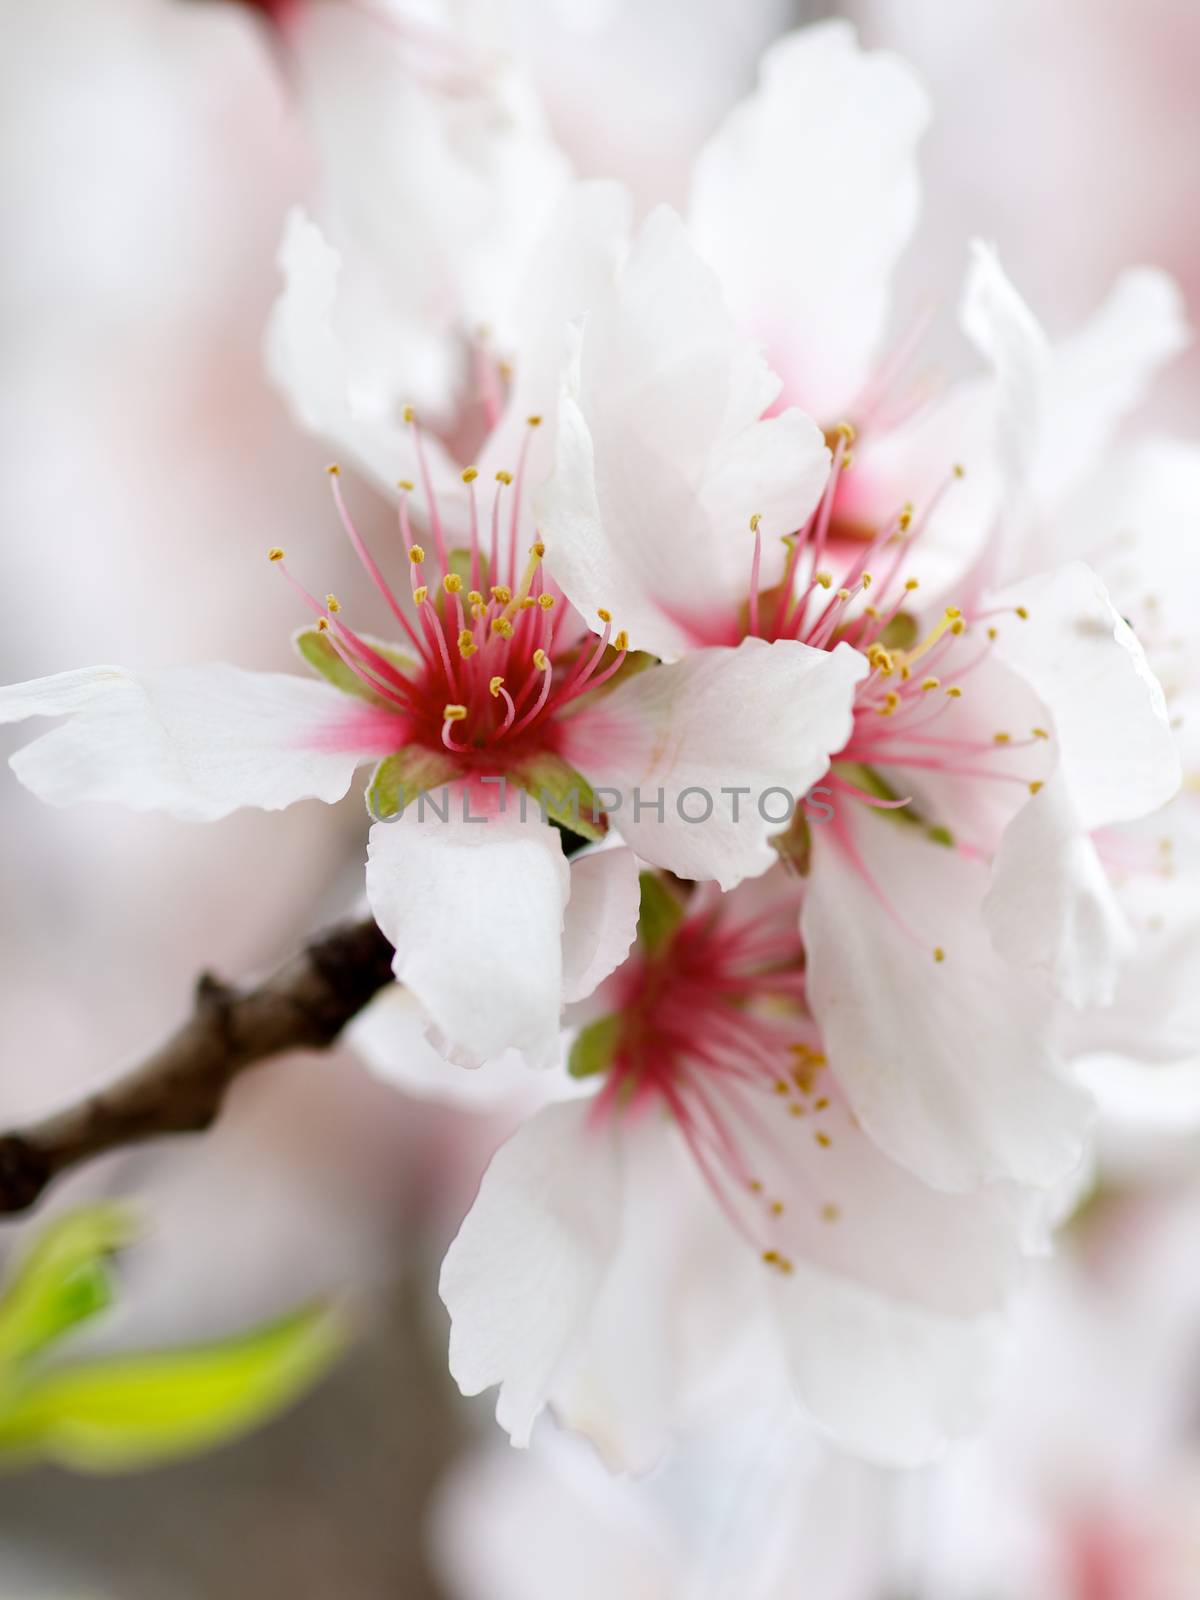 Beauty White and Red Cherry Blossoms on Blurred Cherry Flowers background. Focus on Pistil with Pollen